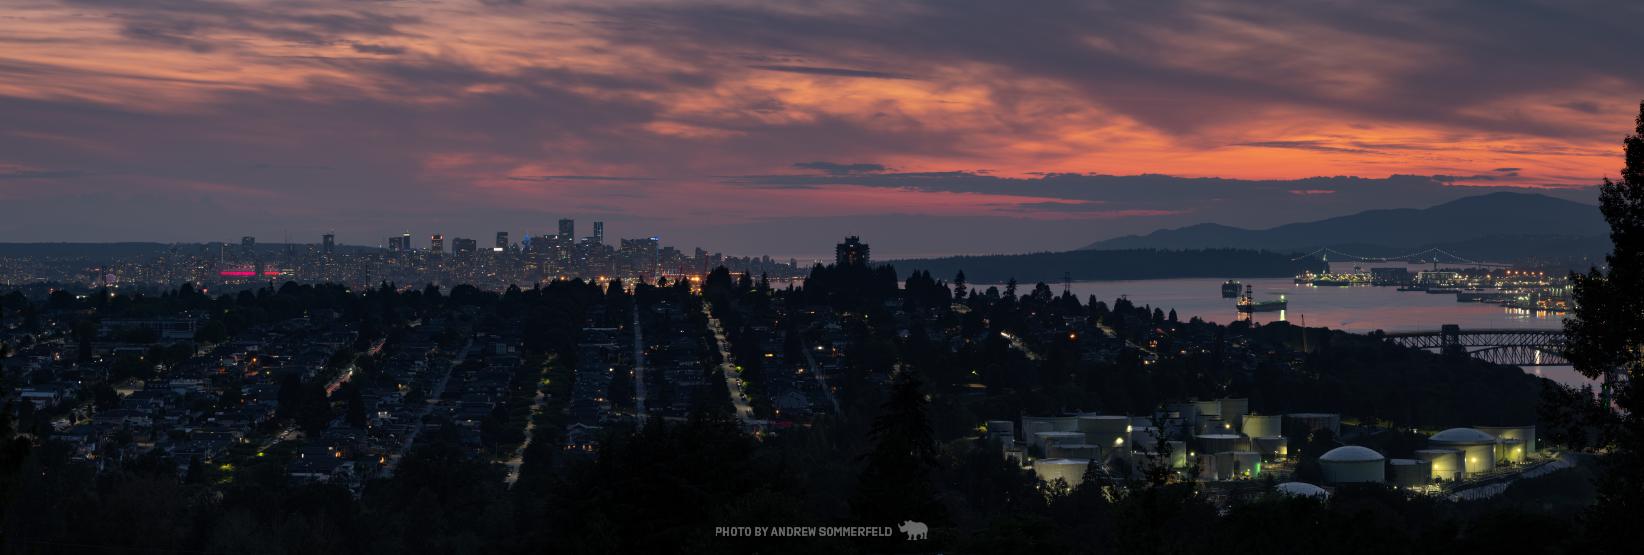 Good Evening from Capitol Hill by Andrew Sommerfeld